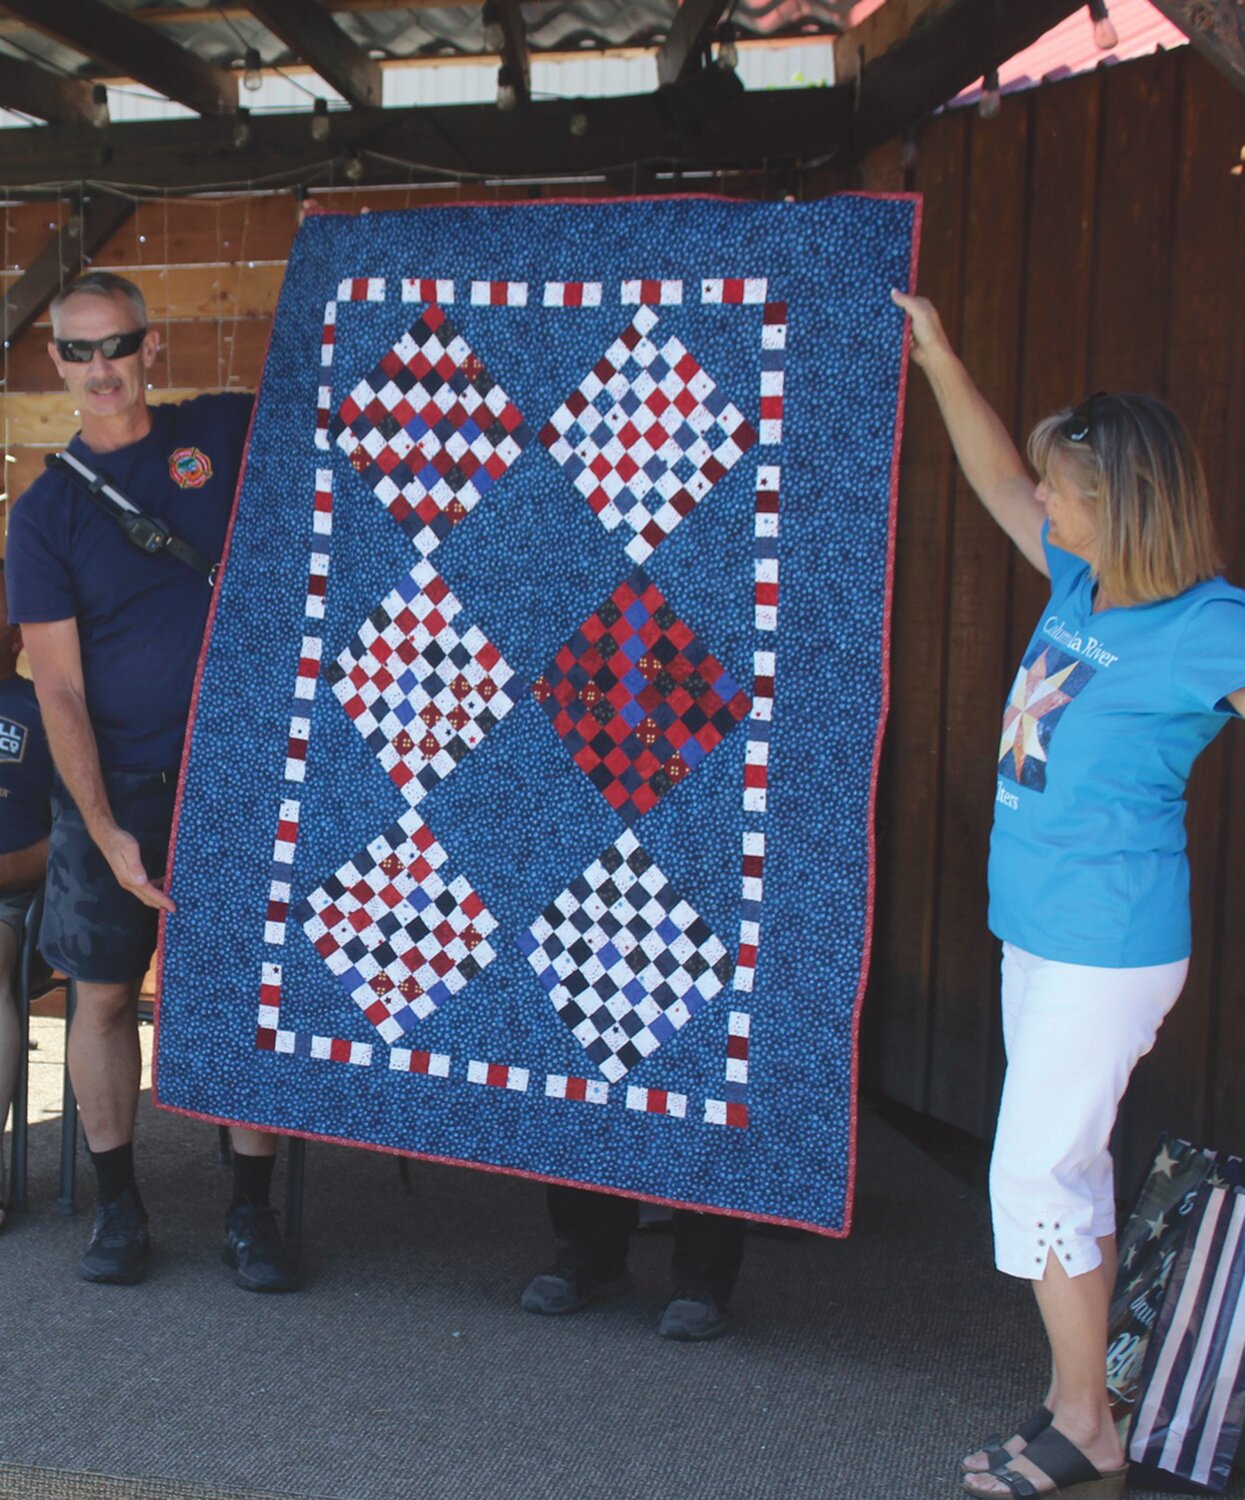 Keith Zwiegle accepts a quilt from Nancy Woods on behalf of his father, Bill Zwiegle.